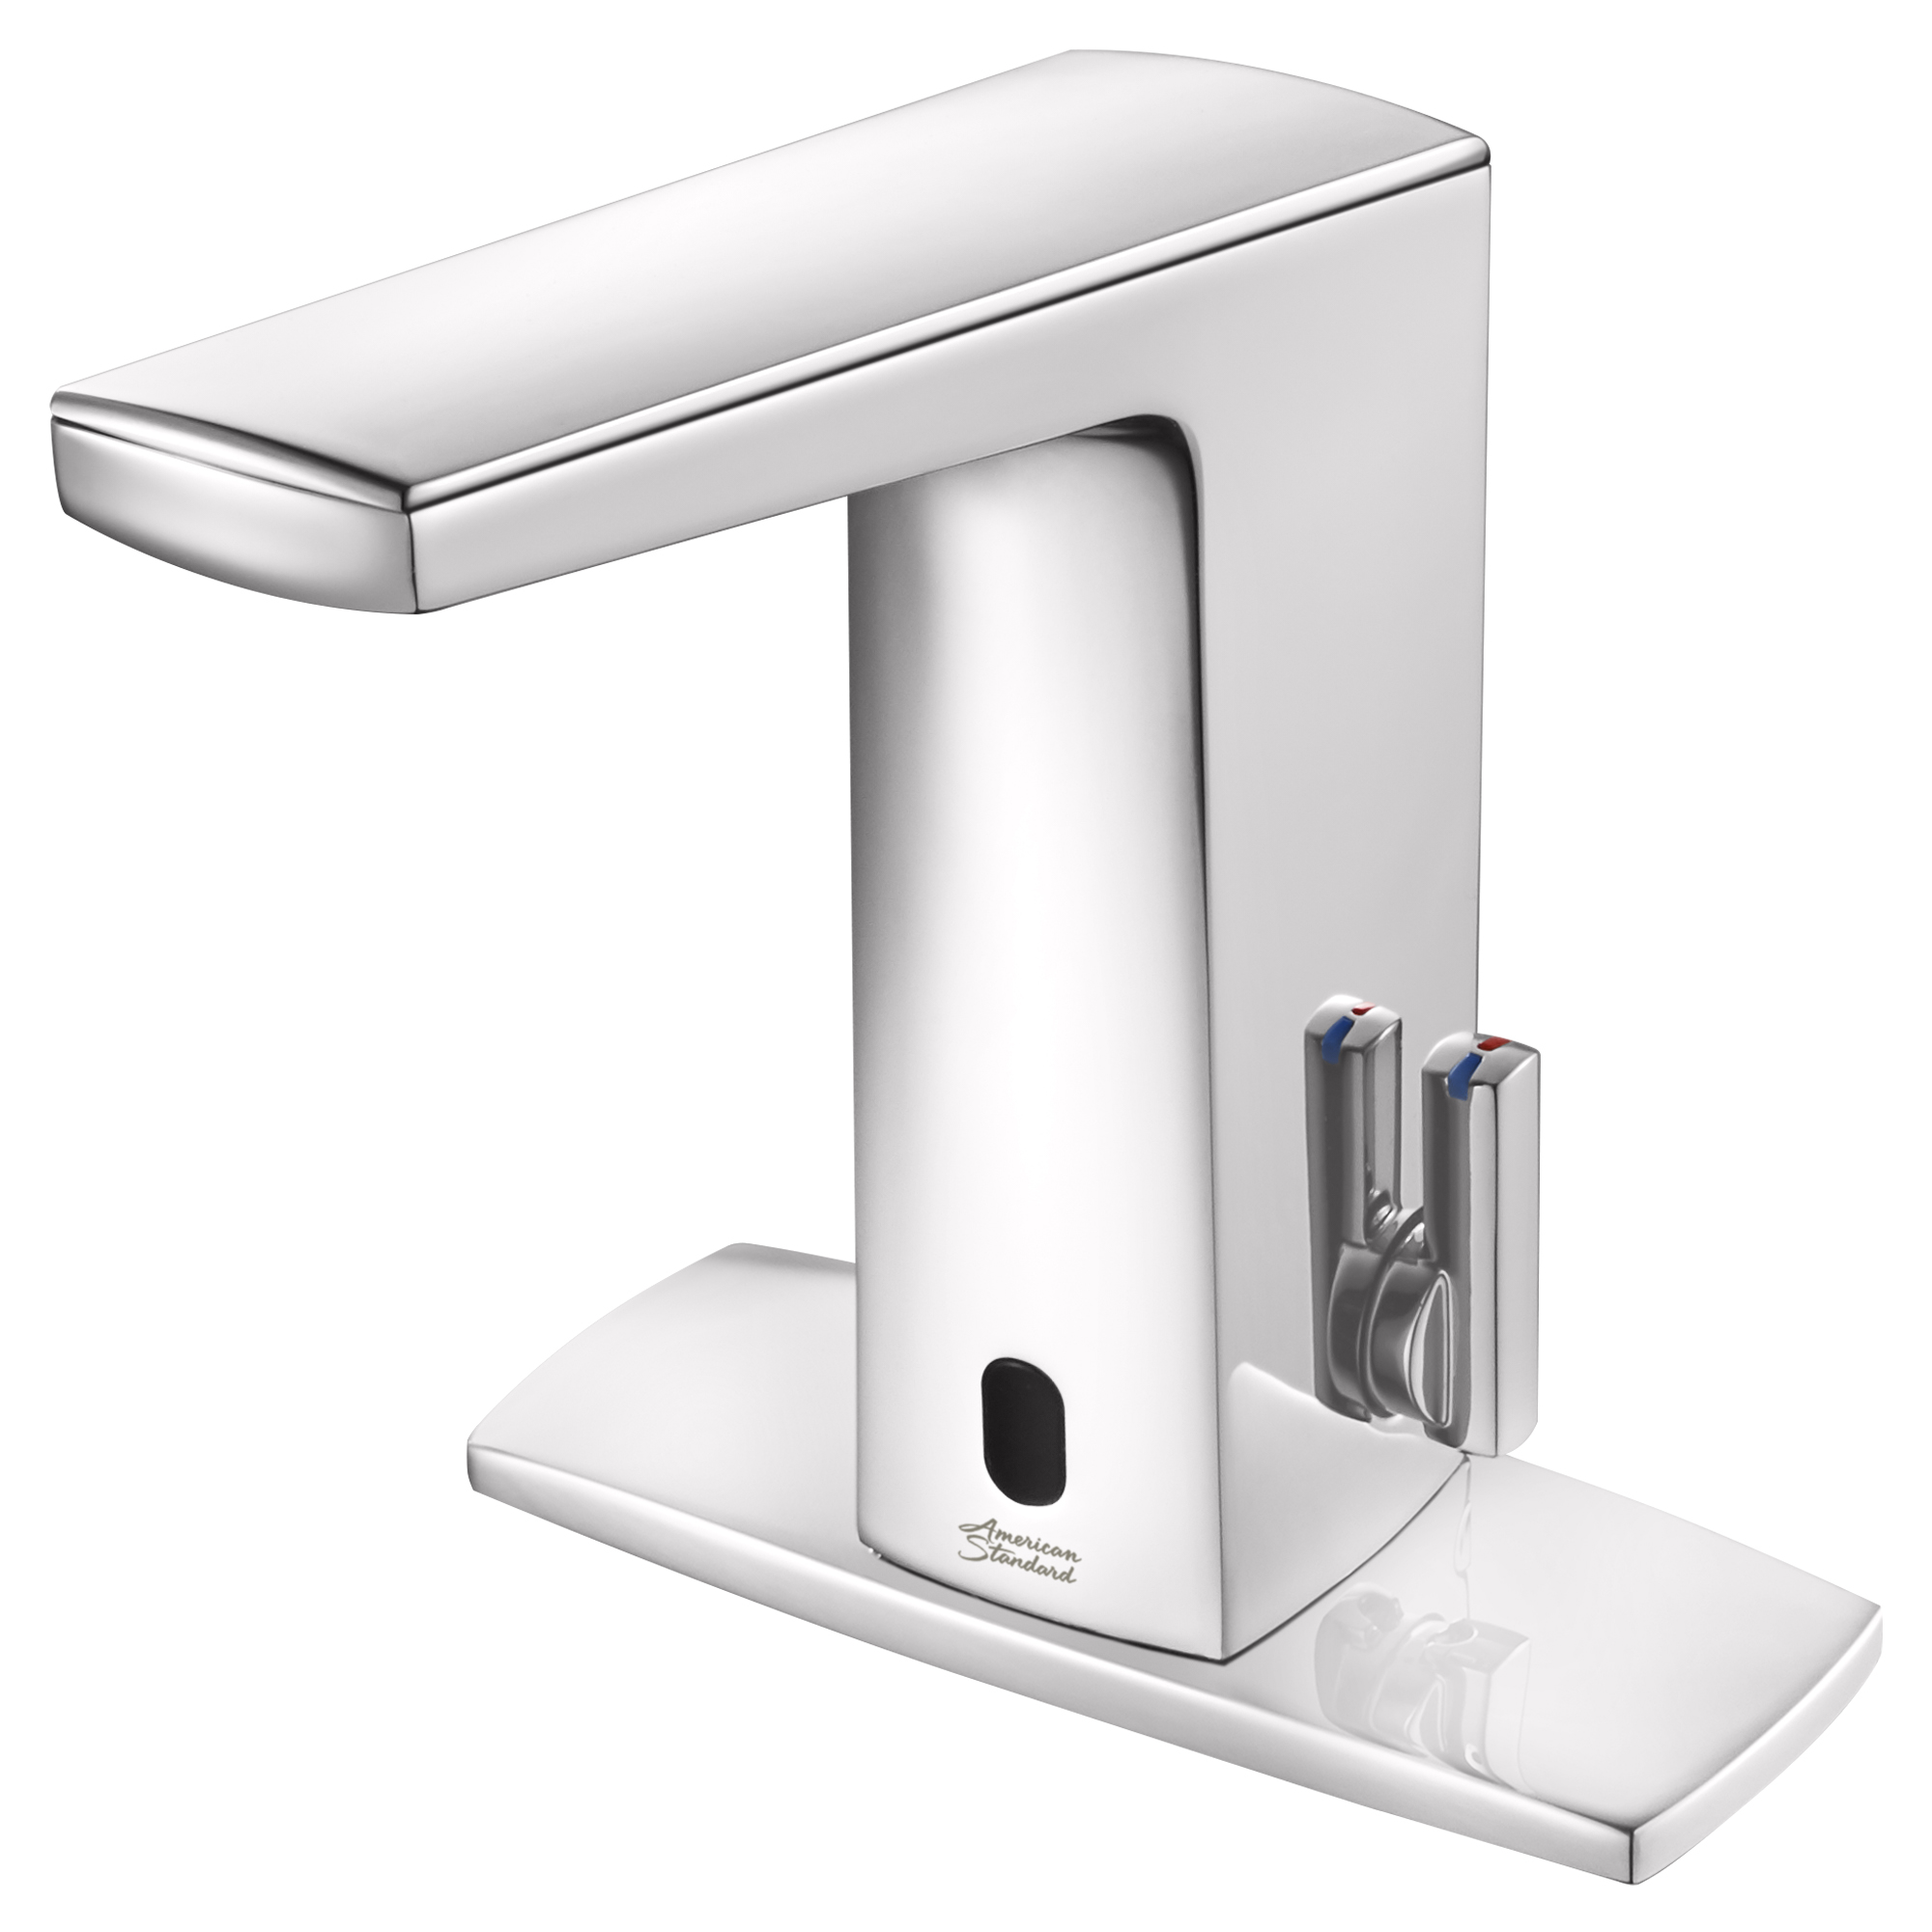 Paradigm™ Selectronic™ Touchless Faucet, Base Model With SmarTherm Safety Shut-Off + ADM, 0.35 gpm/1.3 Lpm